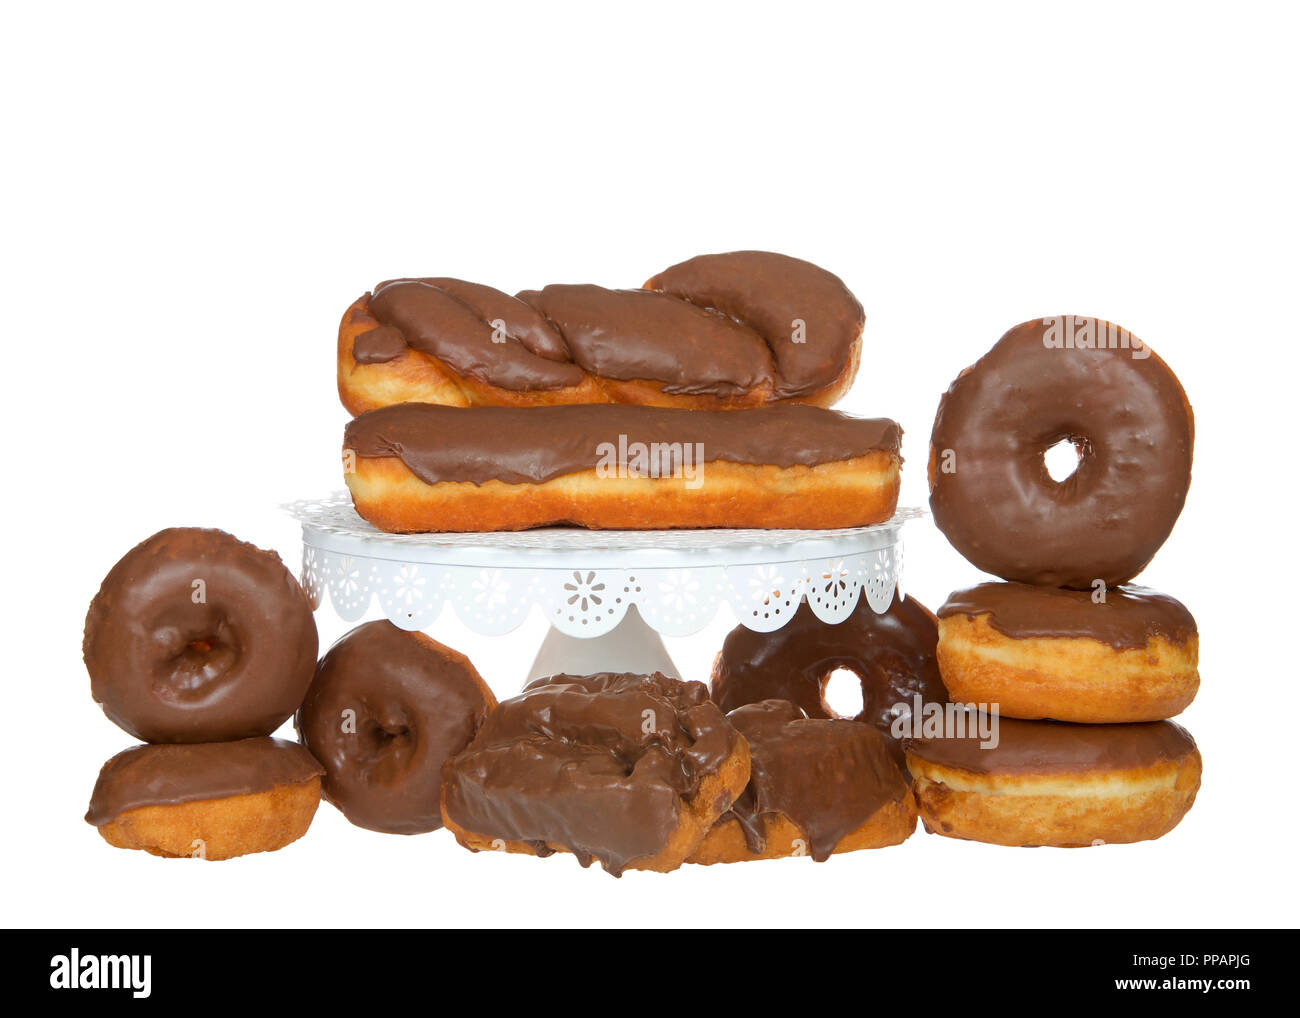 Many cake donuts, glazed twist, bar and old fashioned donuts frosted in chocolate isolated on white background with some on white pedestal. Stock Photo